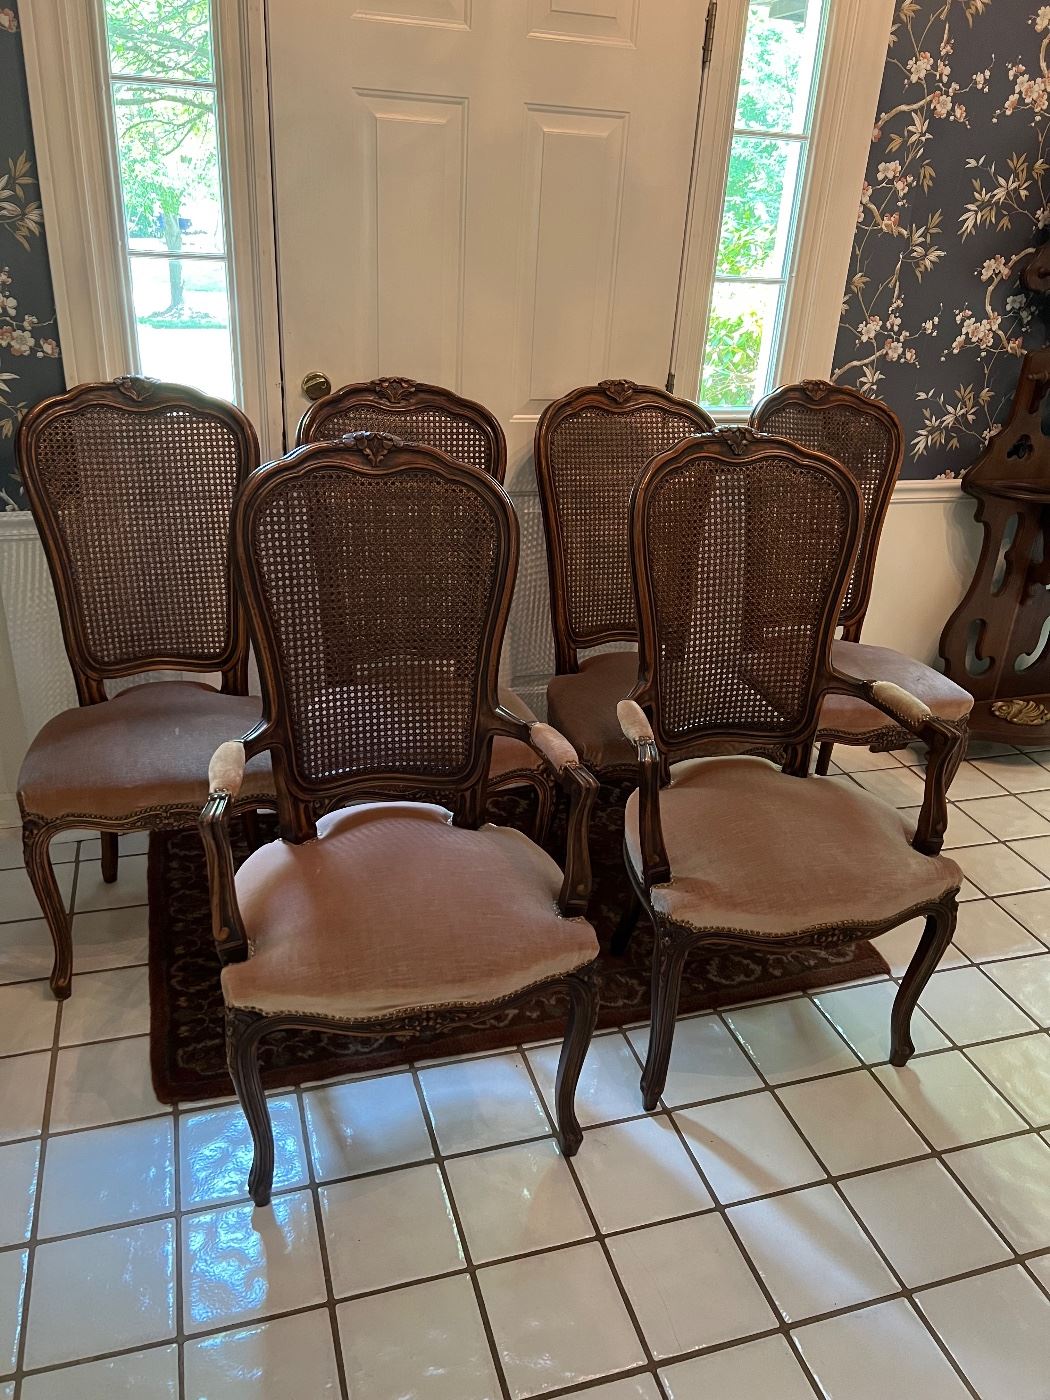 Chairs available for sale separately if desired 